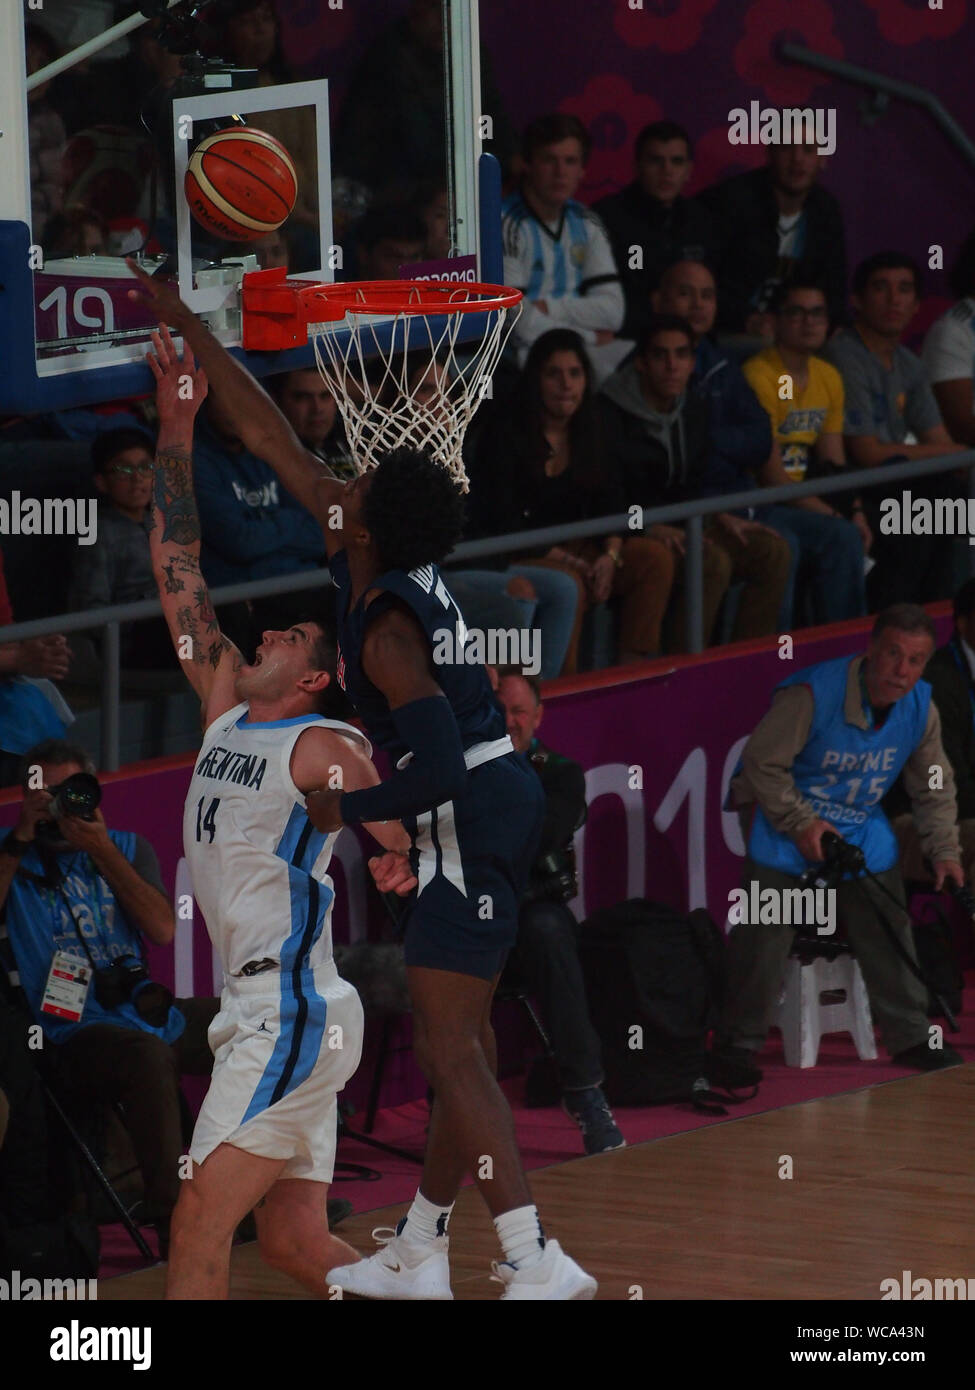 Basketball; Gabriel Deck from Argentina and David Duke from USA in action during the match between Argentina and USA at the Lima 2019 Pan American Games Stock Photo